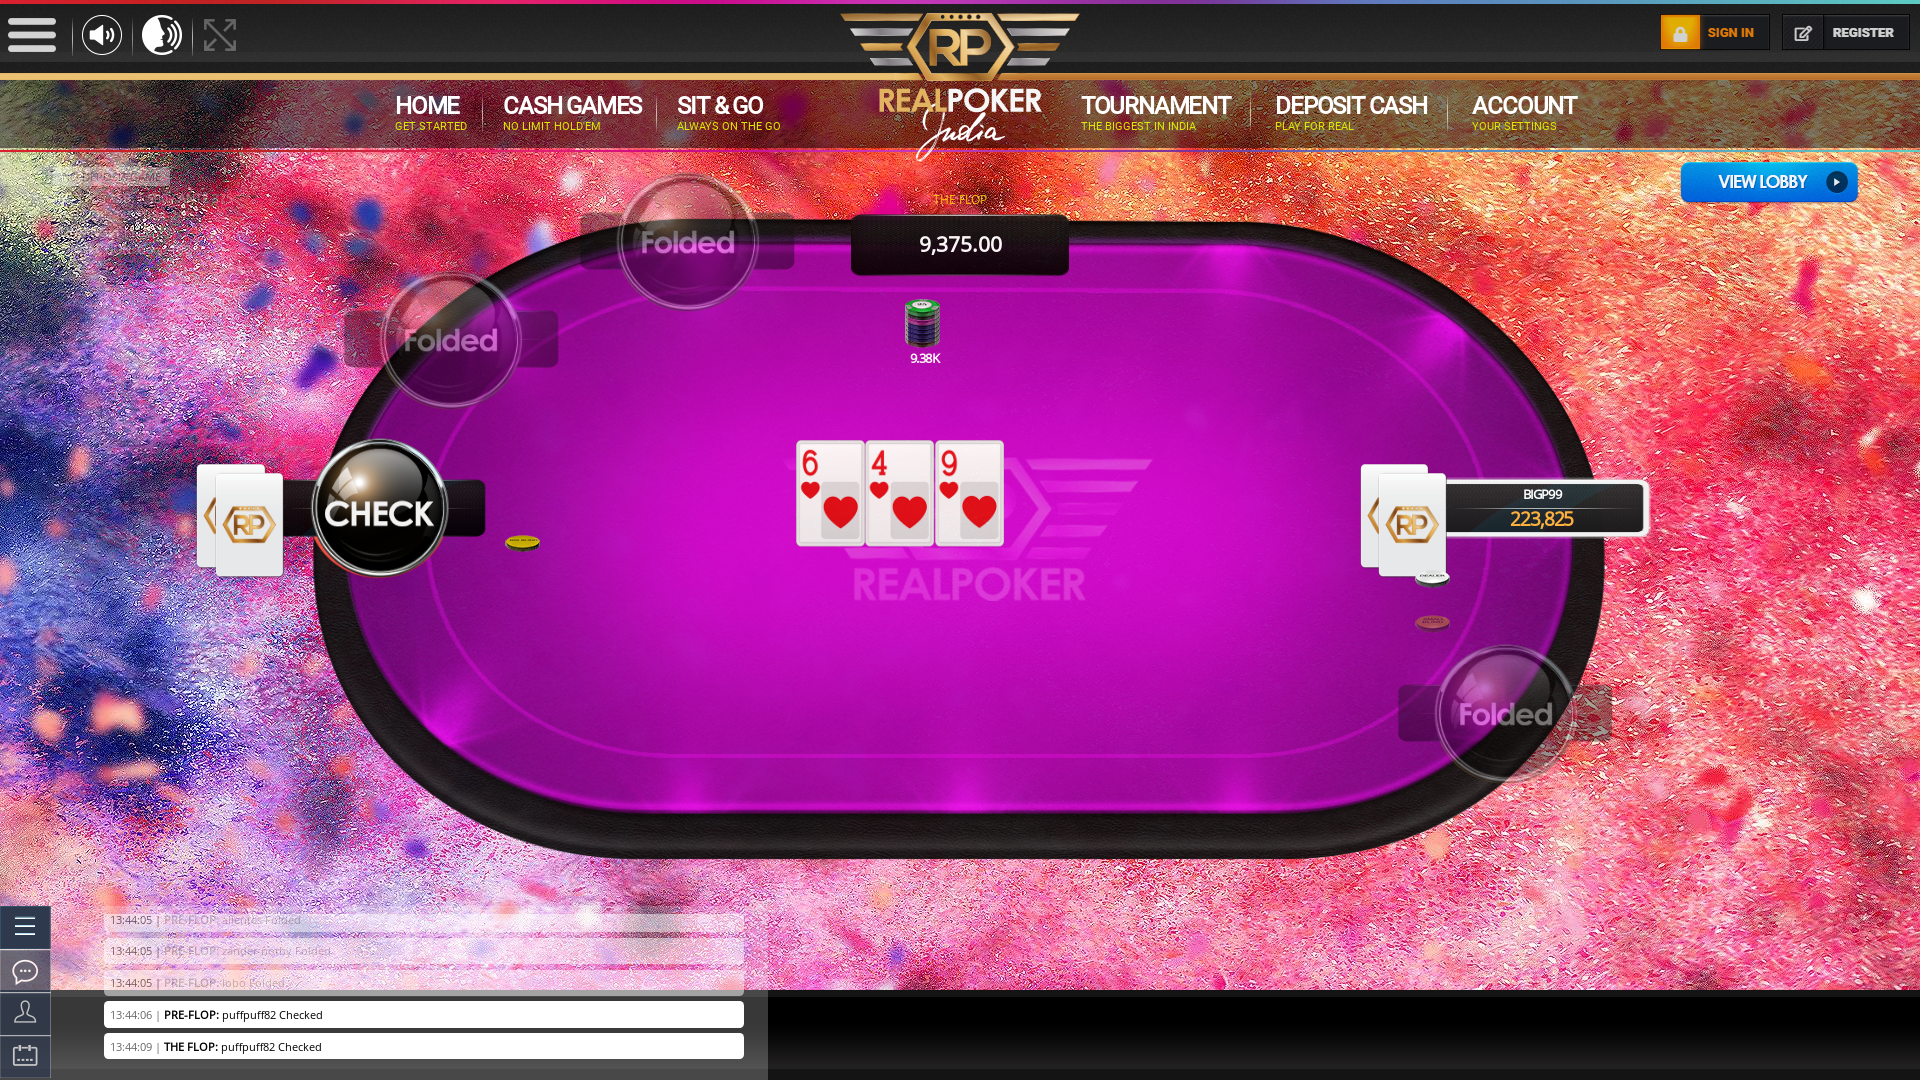 10 player texas holdem table at real poker with the table id 234571